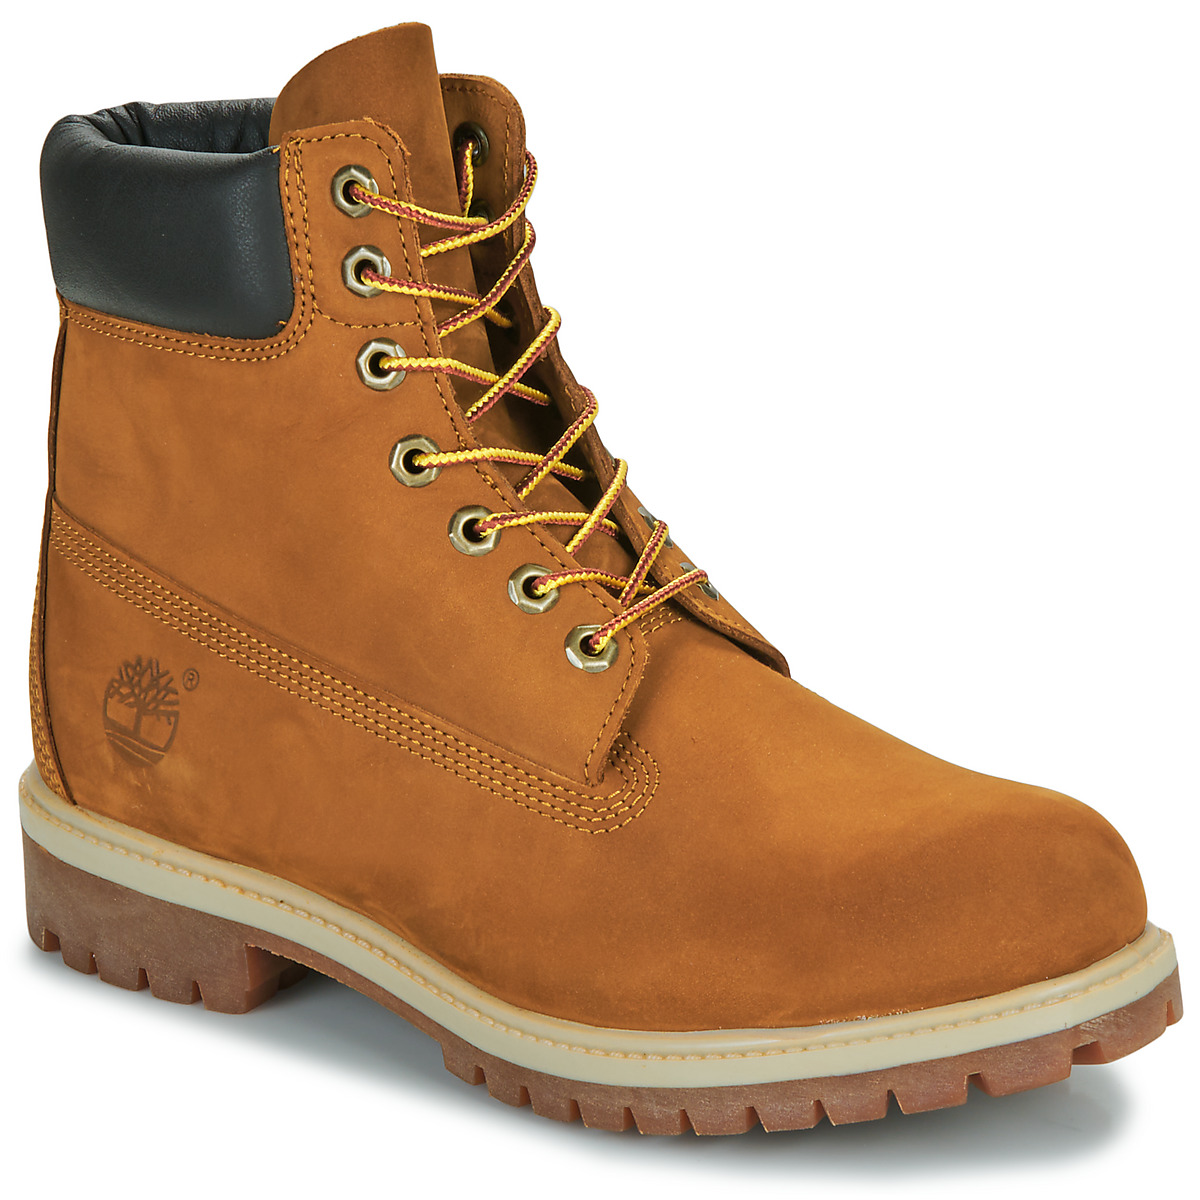 Chaussures Homme Boots Timberland Paid 6 Botas Timberland Paid Pokey Pine 6 In dourado infantil Marron